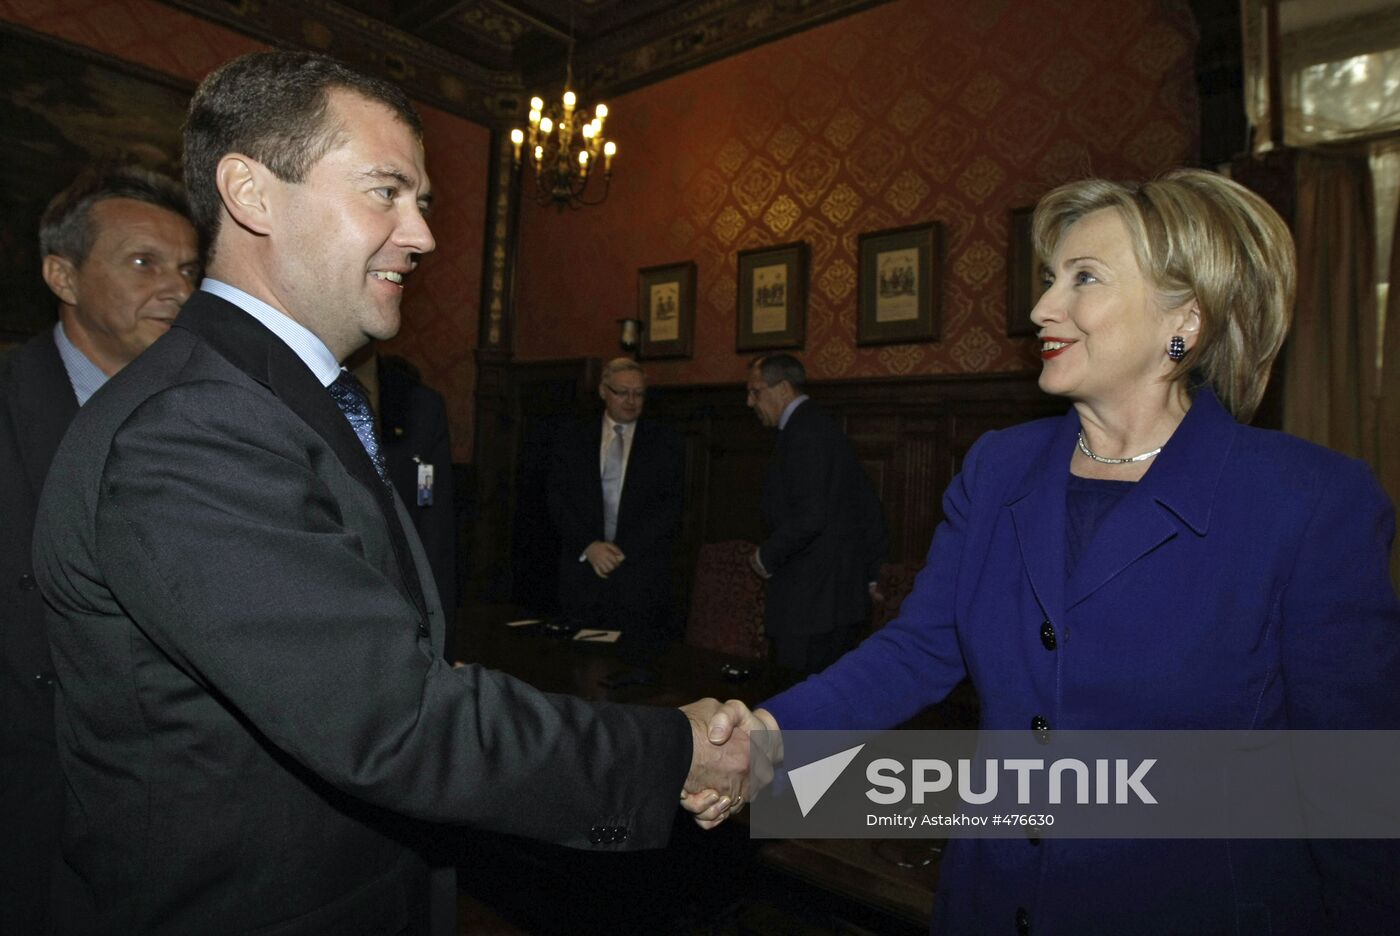 Dmitry Medvedev meets with Hilary Clinton